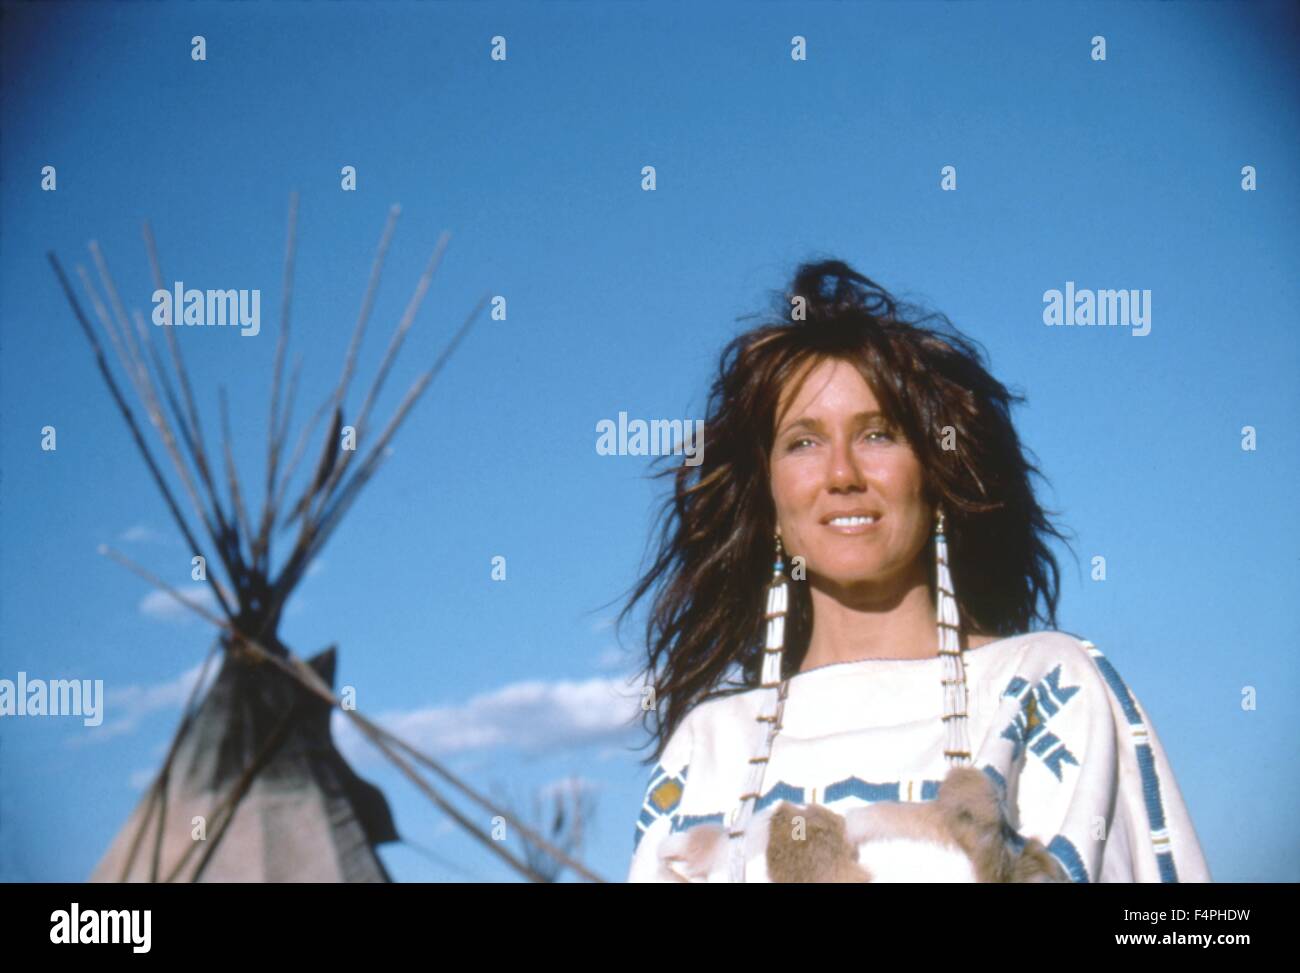 Wolves photos mary mcdonnell with dances Lakota Country